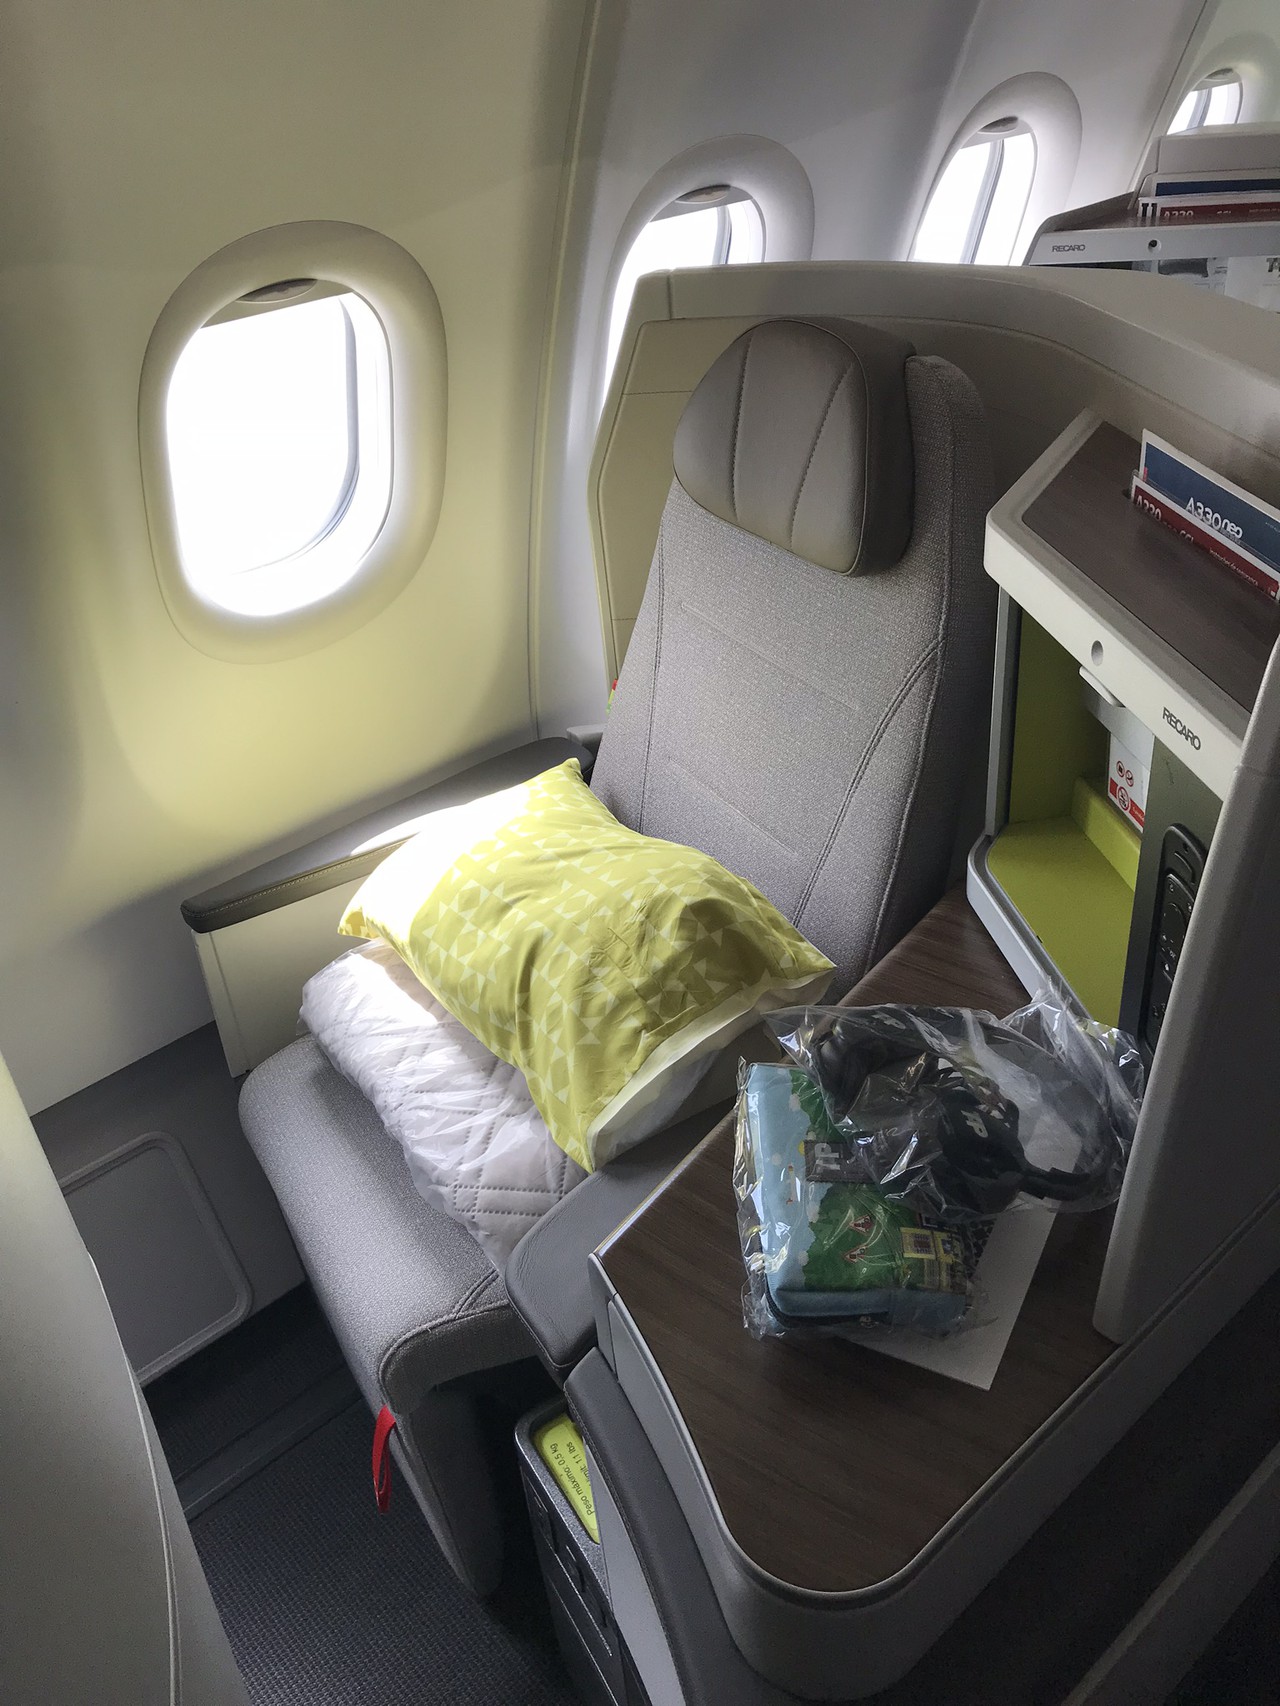 Review of TAP Air Portugal flight from Miami to Lisbon in Business